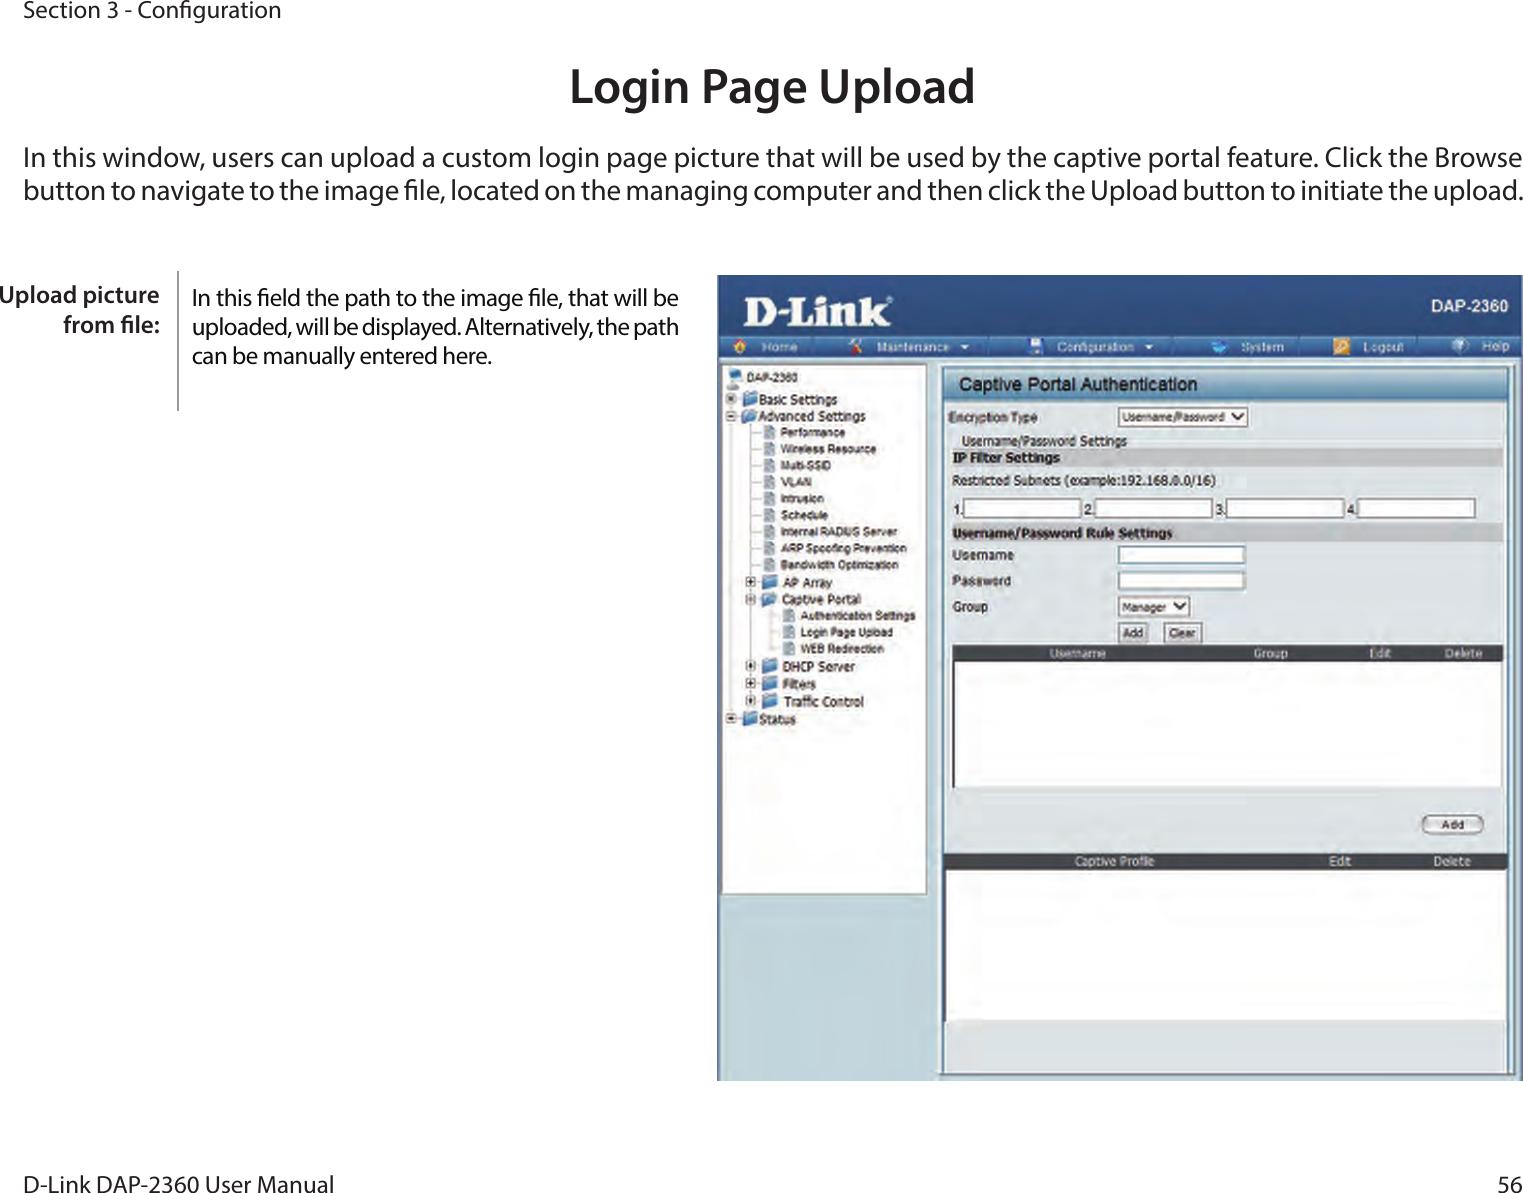 56D-Link DAP-2360 User ManualSection 3 - CongurationLogin Page UploadIn this window, users can upload a custom login page picture that will be used by the captive portal feature. Click the Browse button to navigate to the image le, located on the managing computer and then click the Upload button to initiate the upload.In this eld the path to the image le, that will be uploaded, will be displayed. Alternatively, the path  can be manually entered here.Upload picture from le: